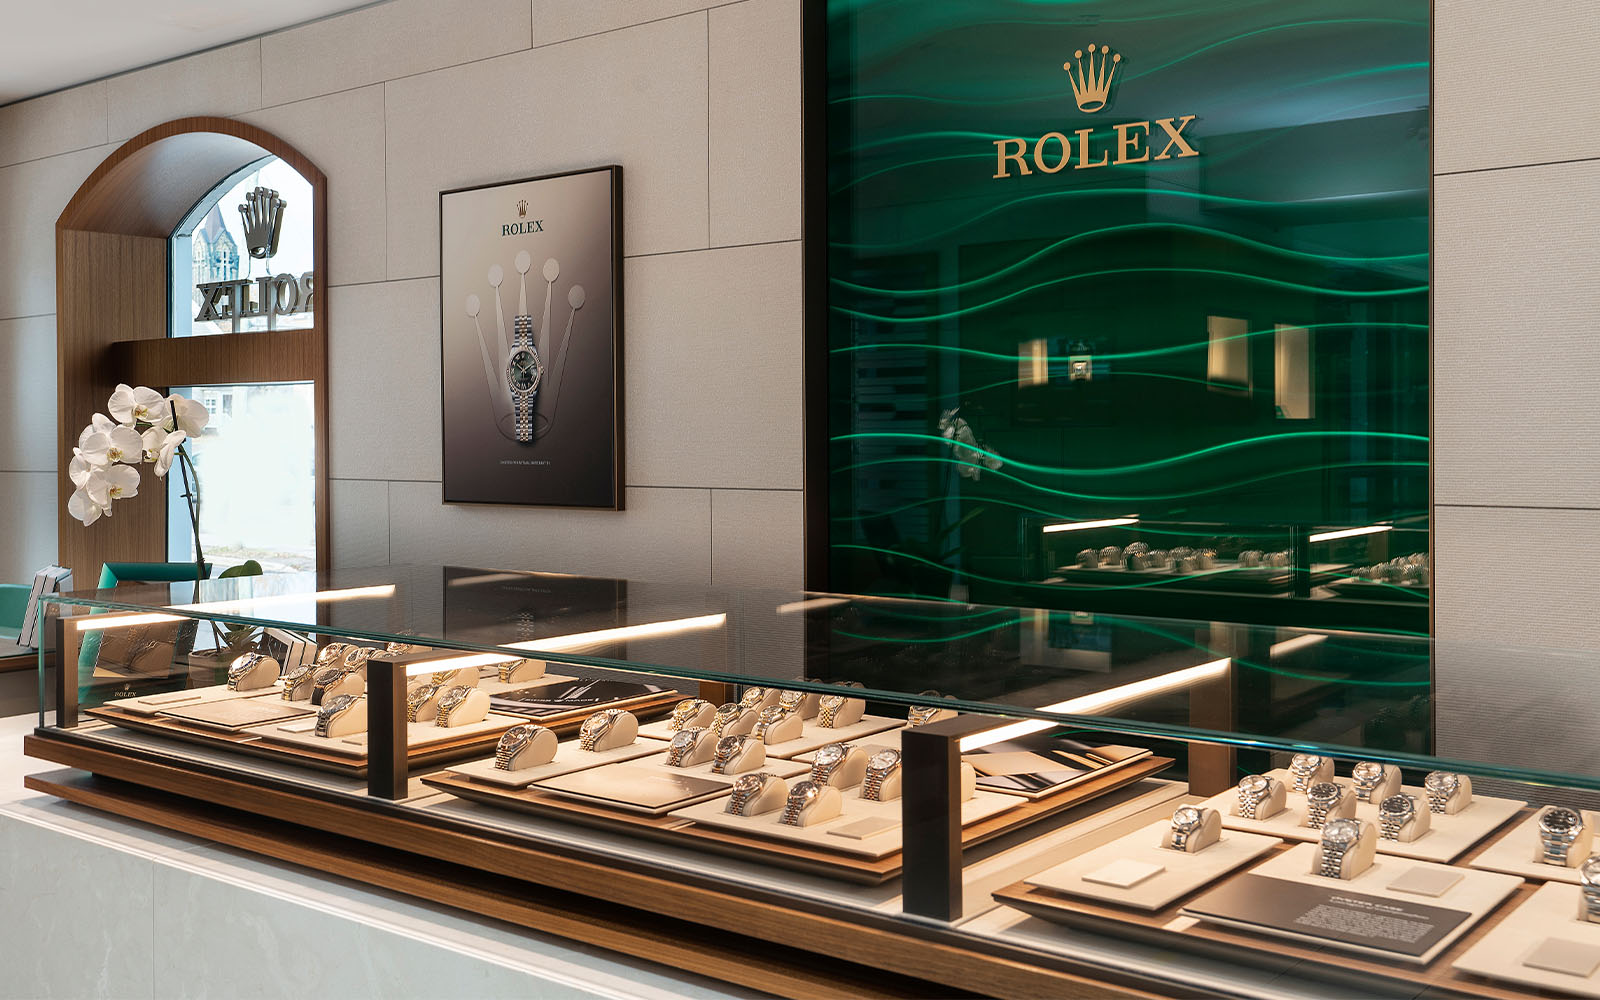 Rolex Timepieces at La Mine dOr Jewellers, an Official Rolex Retailer in Moncton, NB, Canada